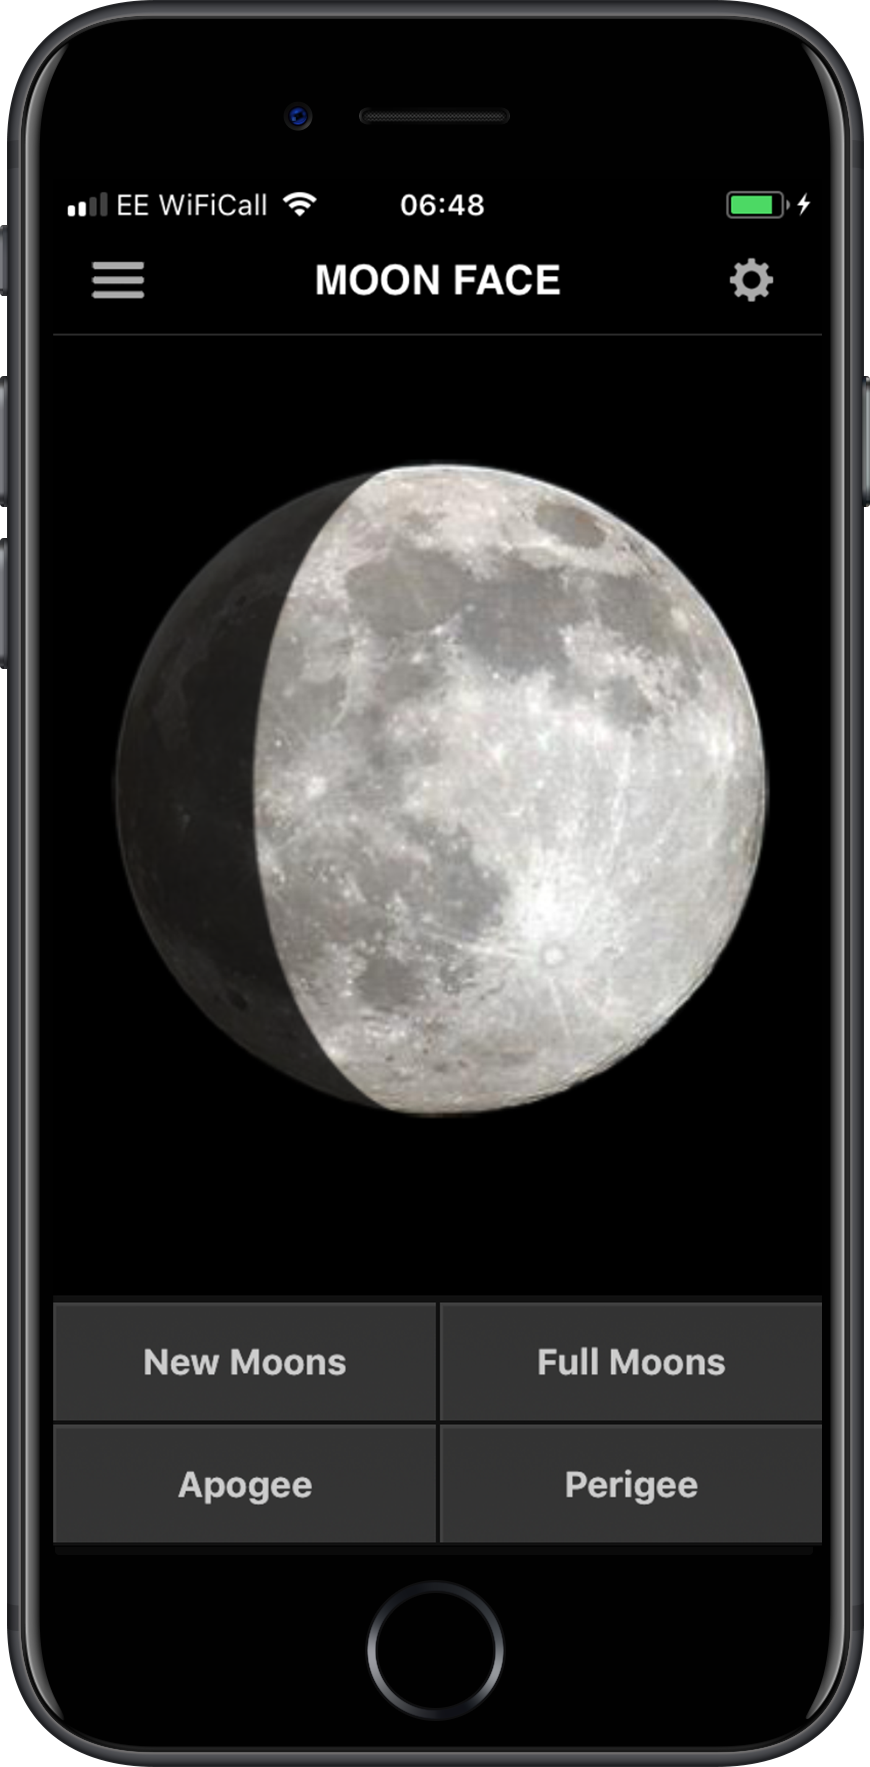 Moonface On iPhone